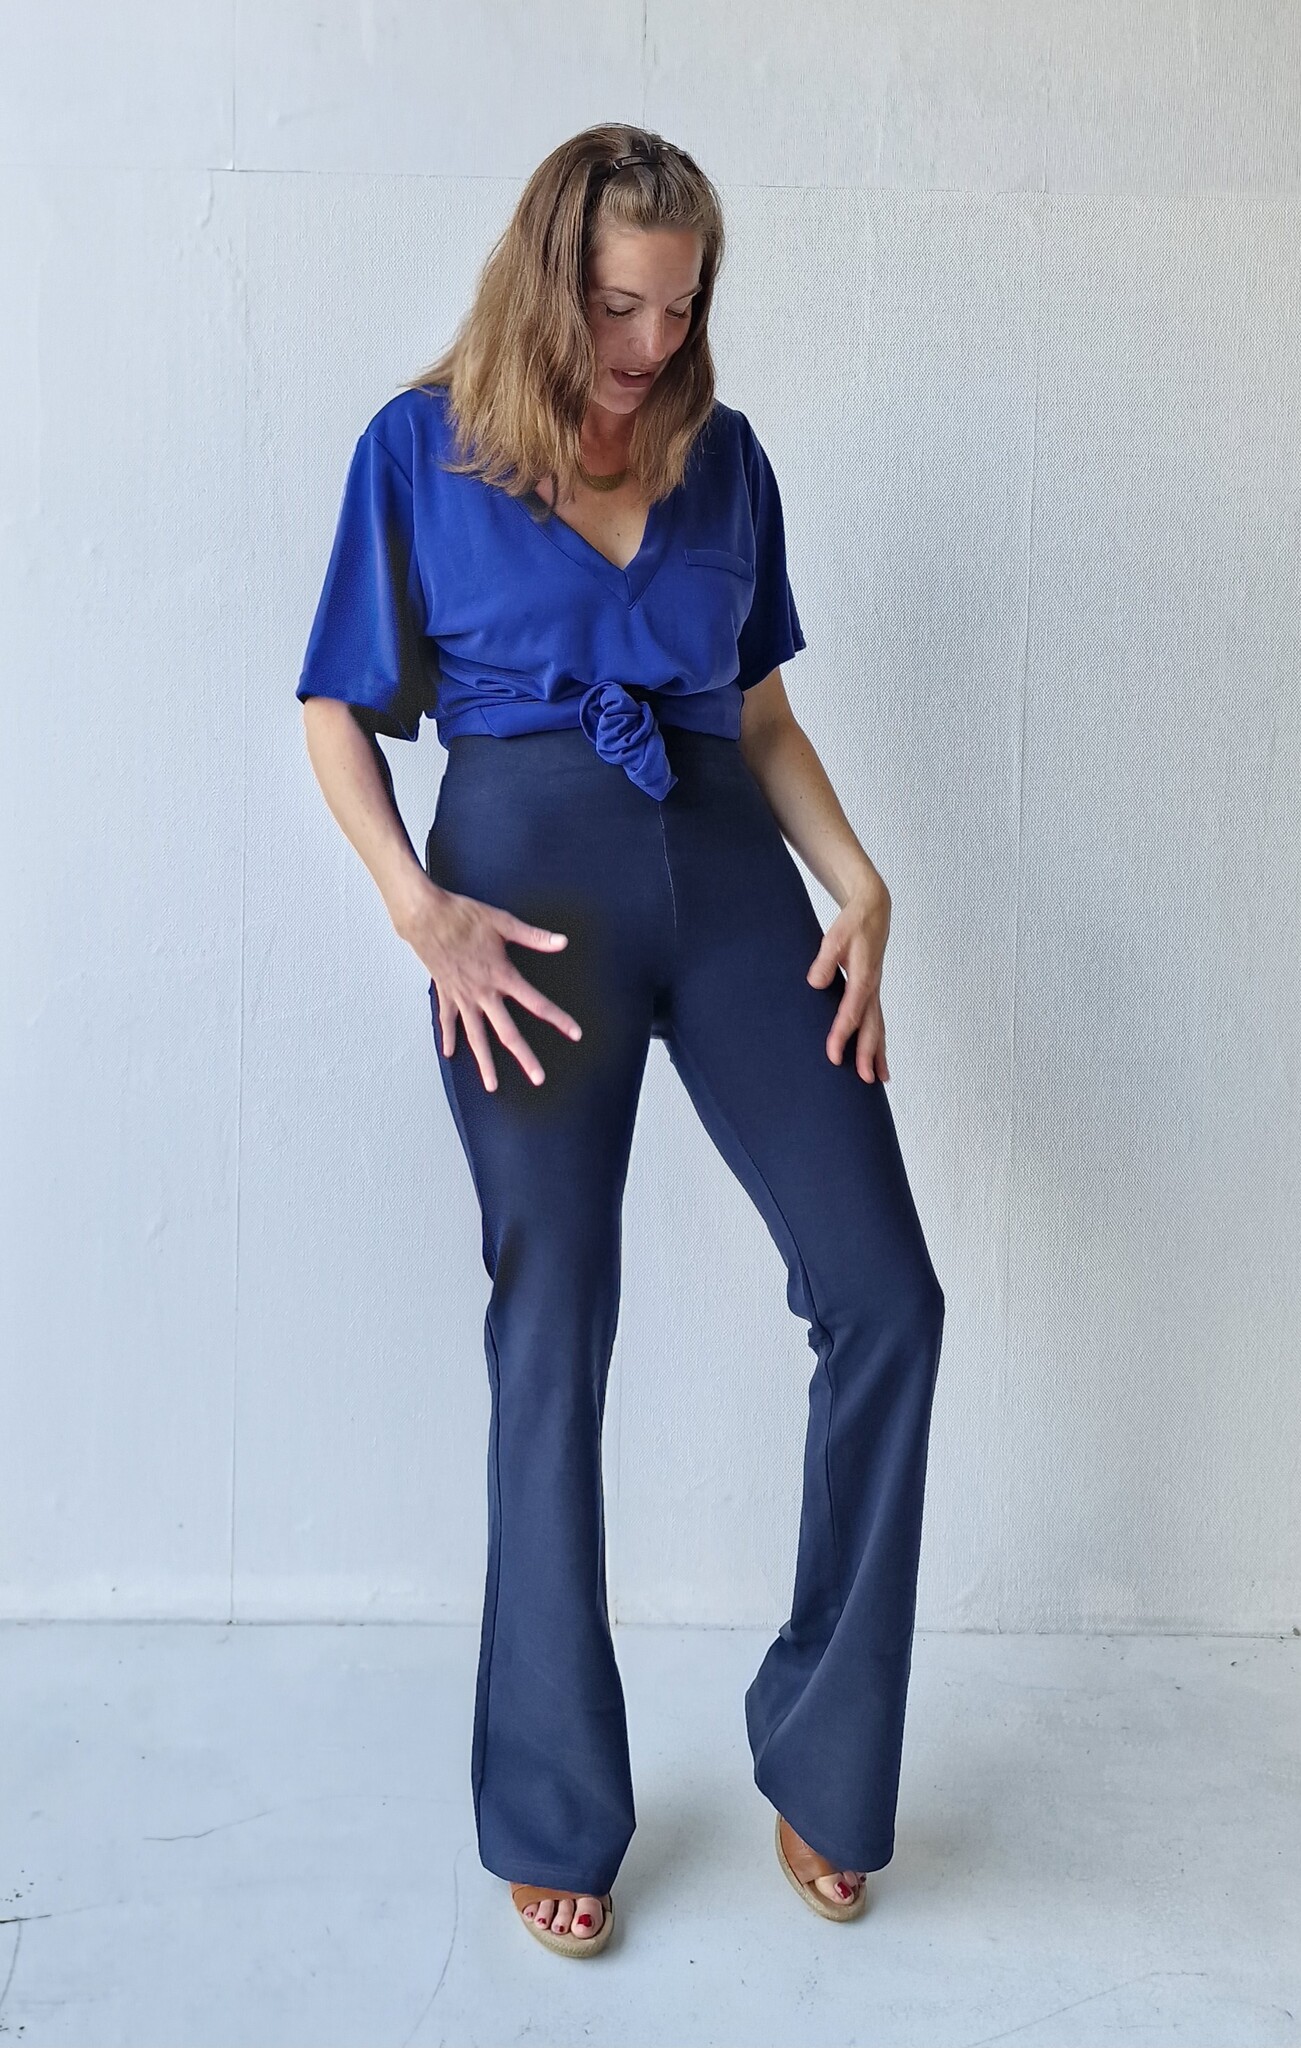 FLARED TROUSERS - Navy blue